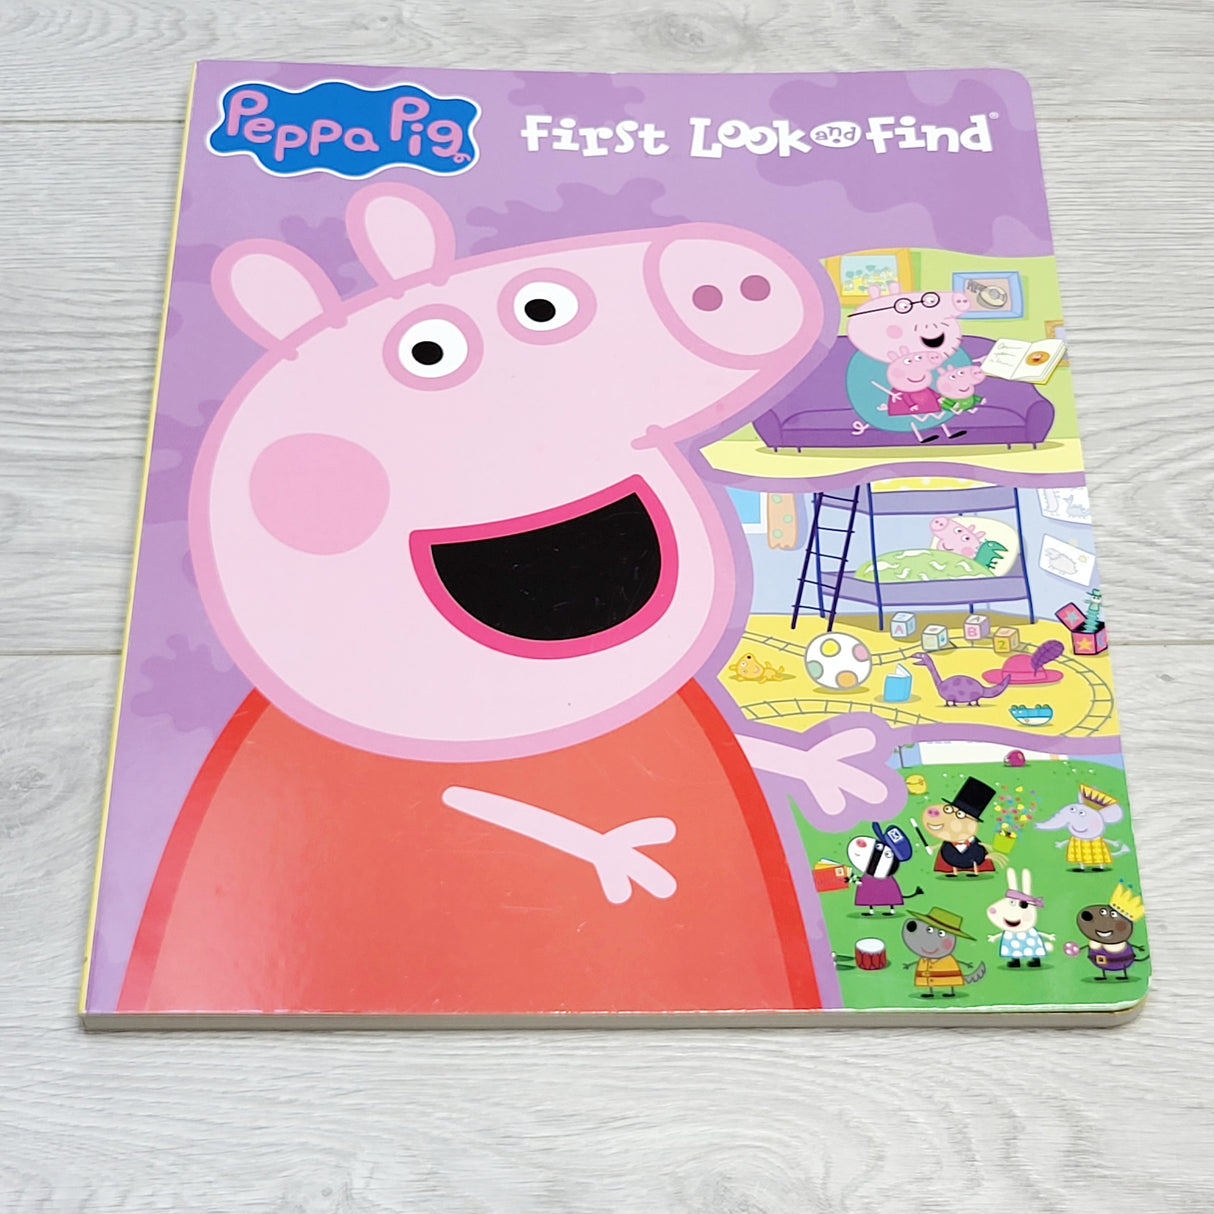 MSNDS2 - Peppa Pig First Look and Find. Large board book